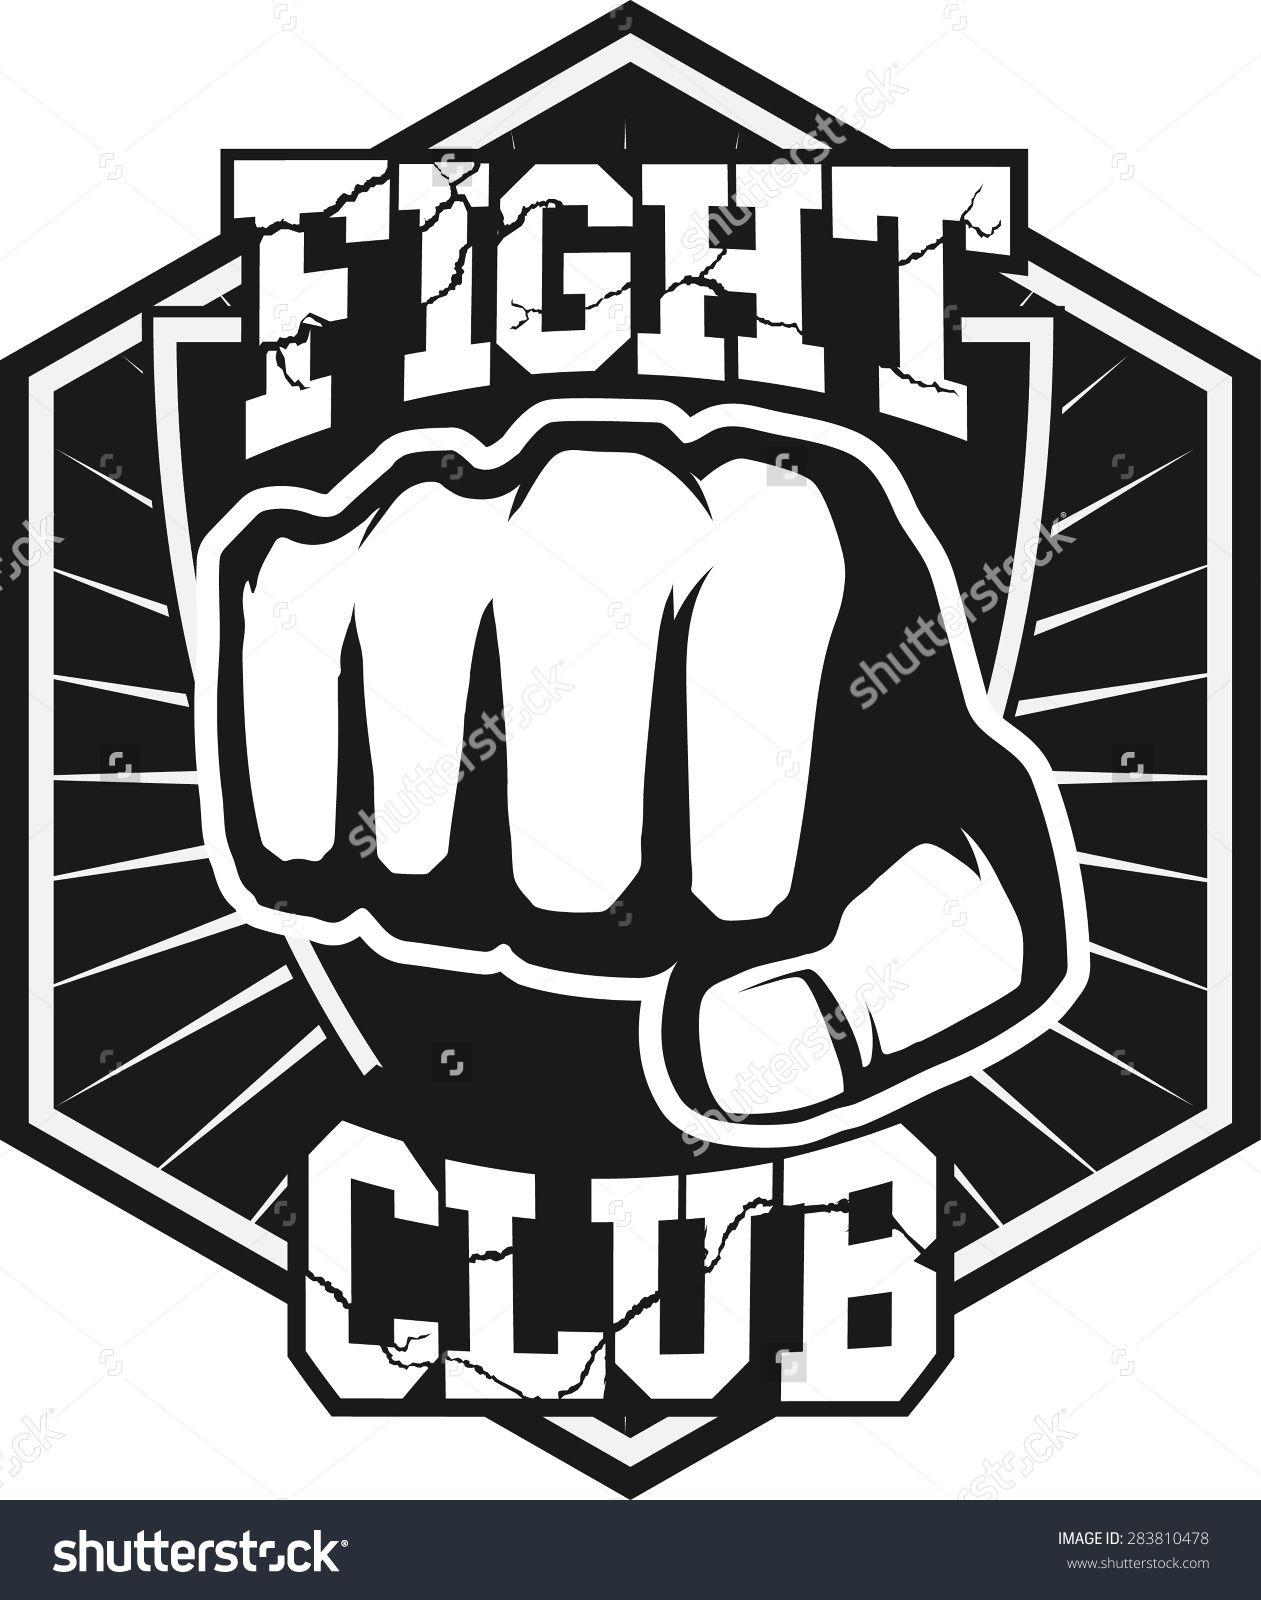 MMA Logo - Fight club MMA UFC Mixed martial arts fighting logo stamp ...